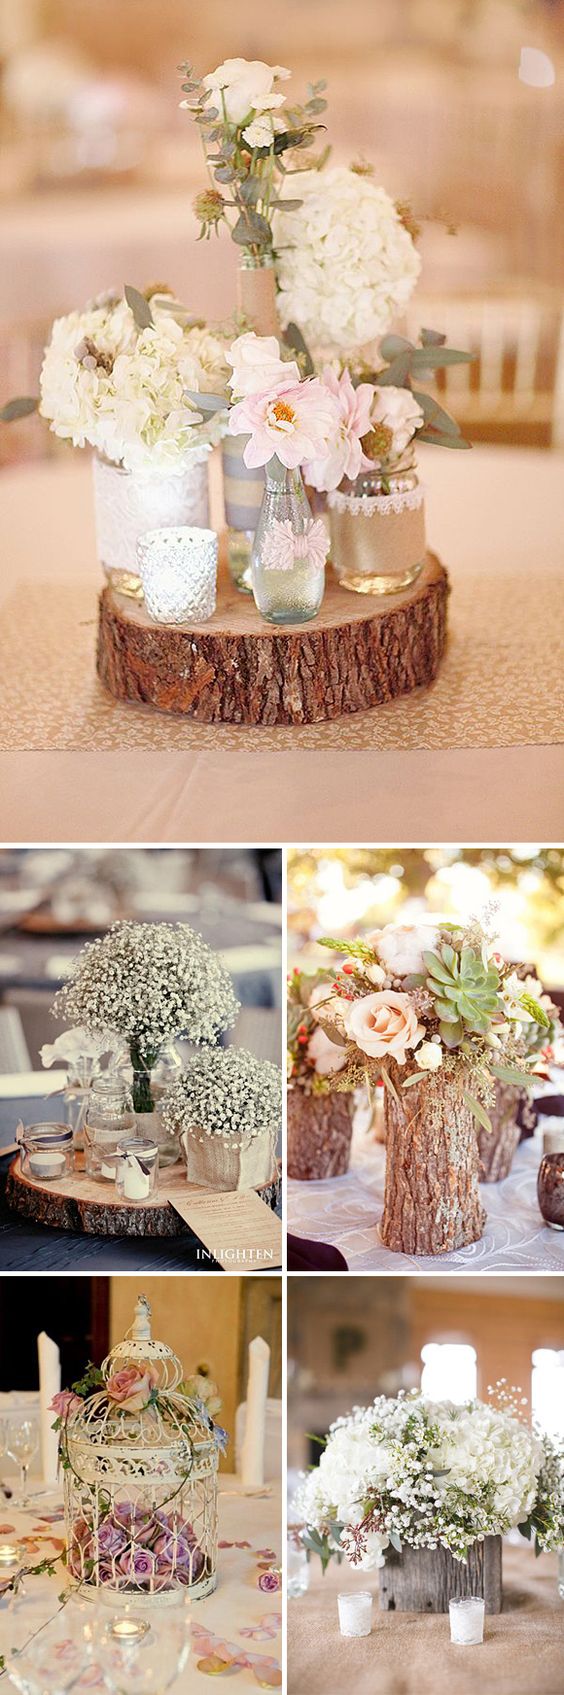 rustic country wedding centerpieces